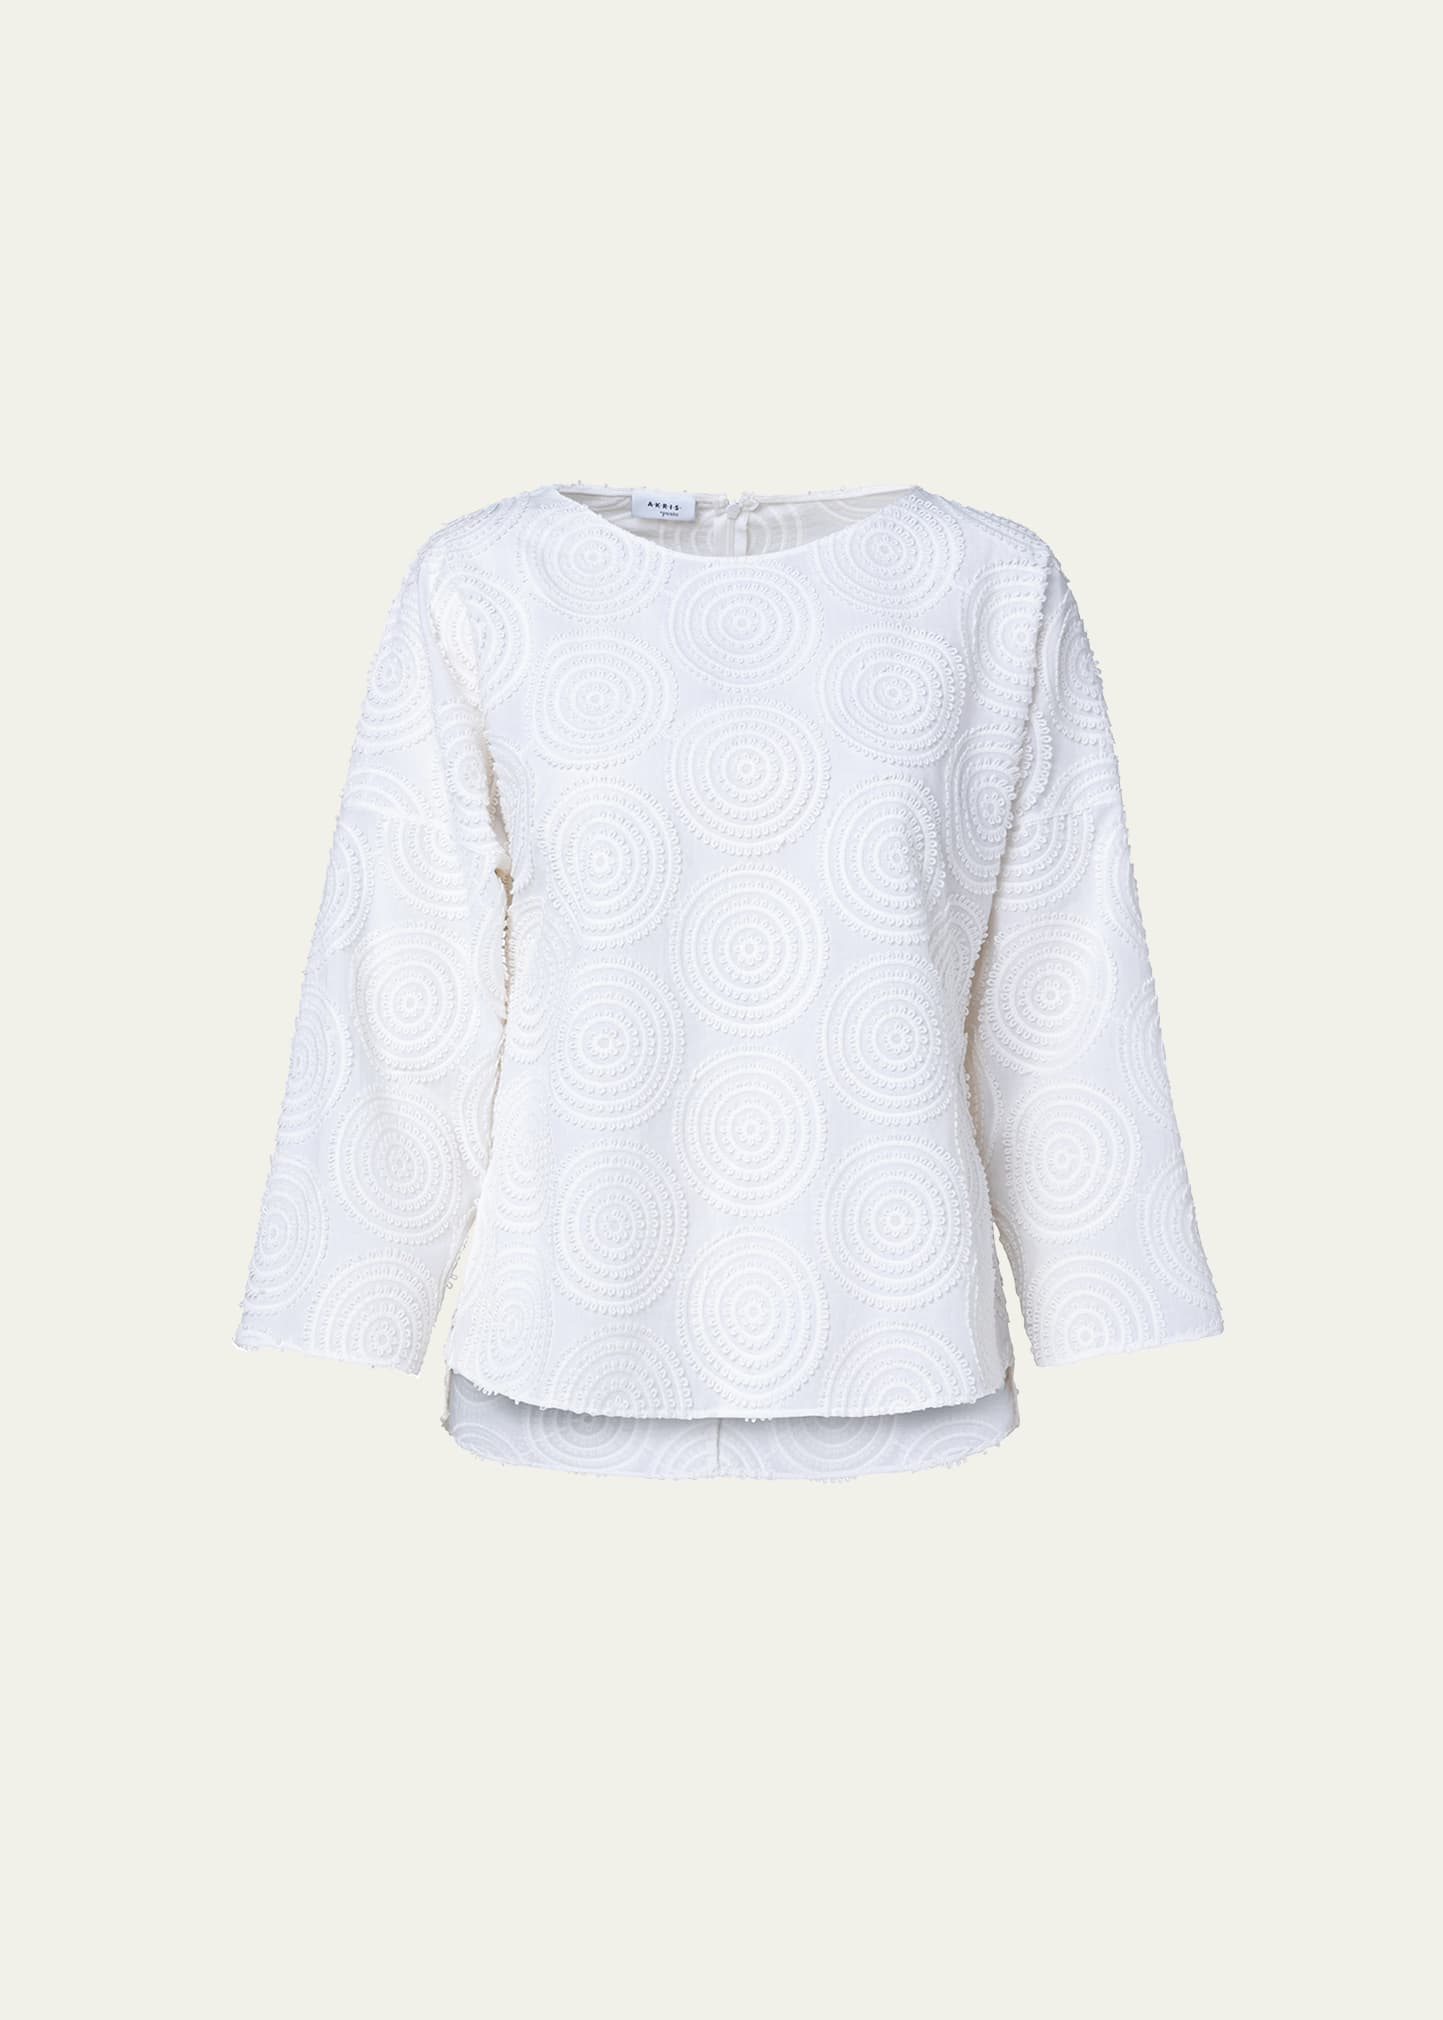 Circle Loop Embroidered Blouse